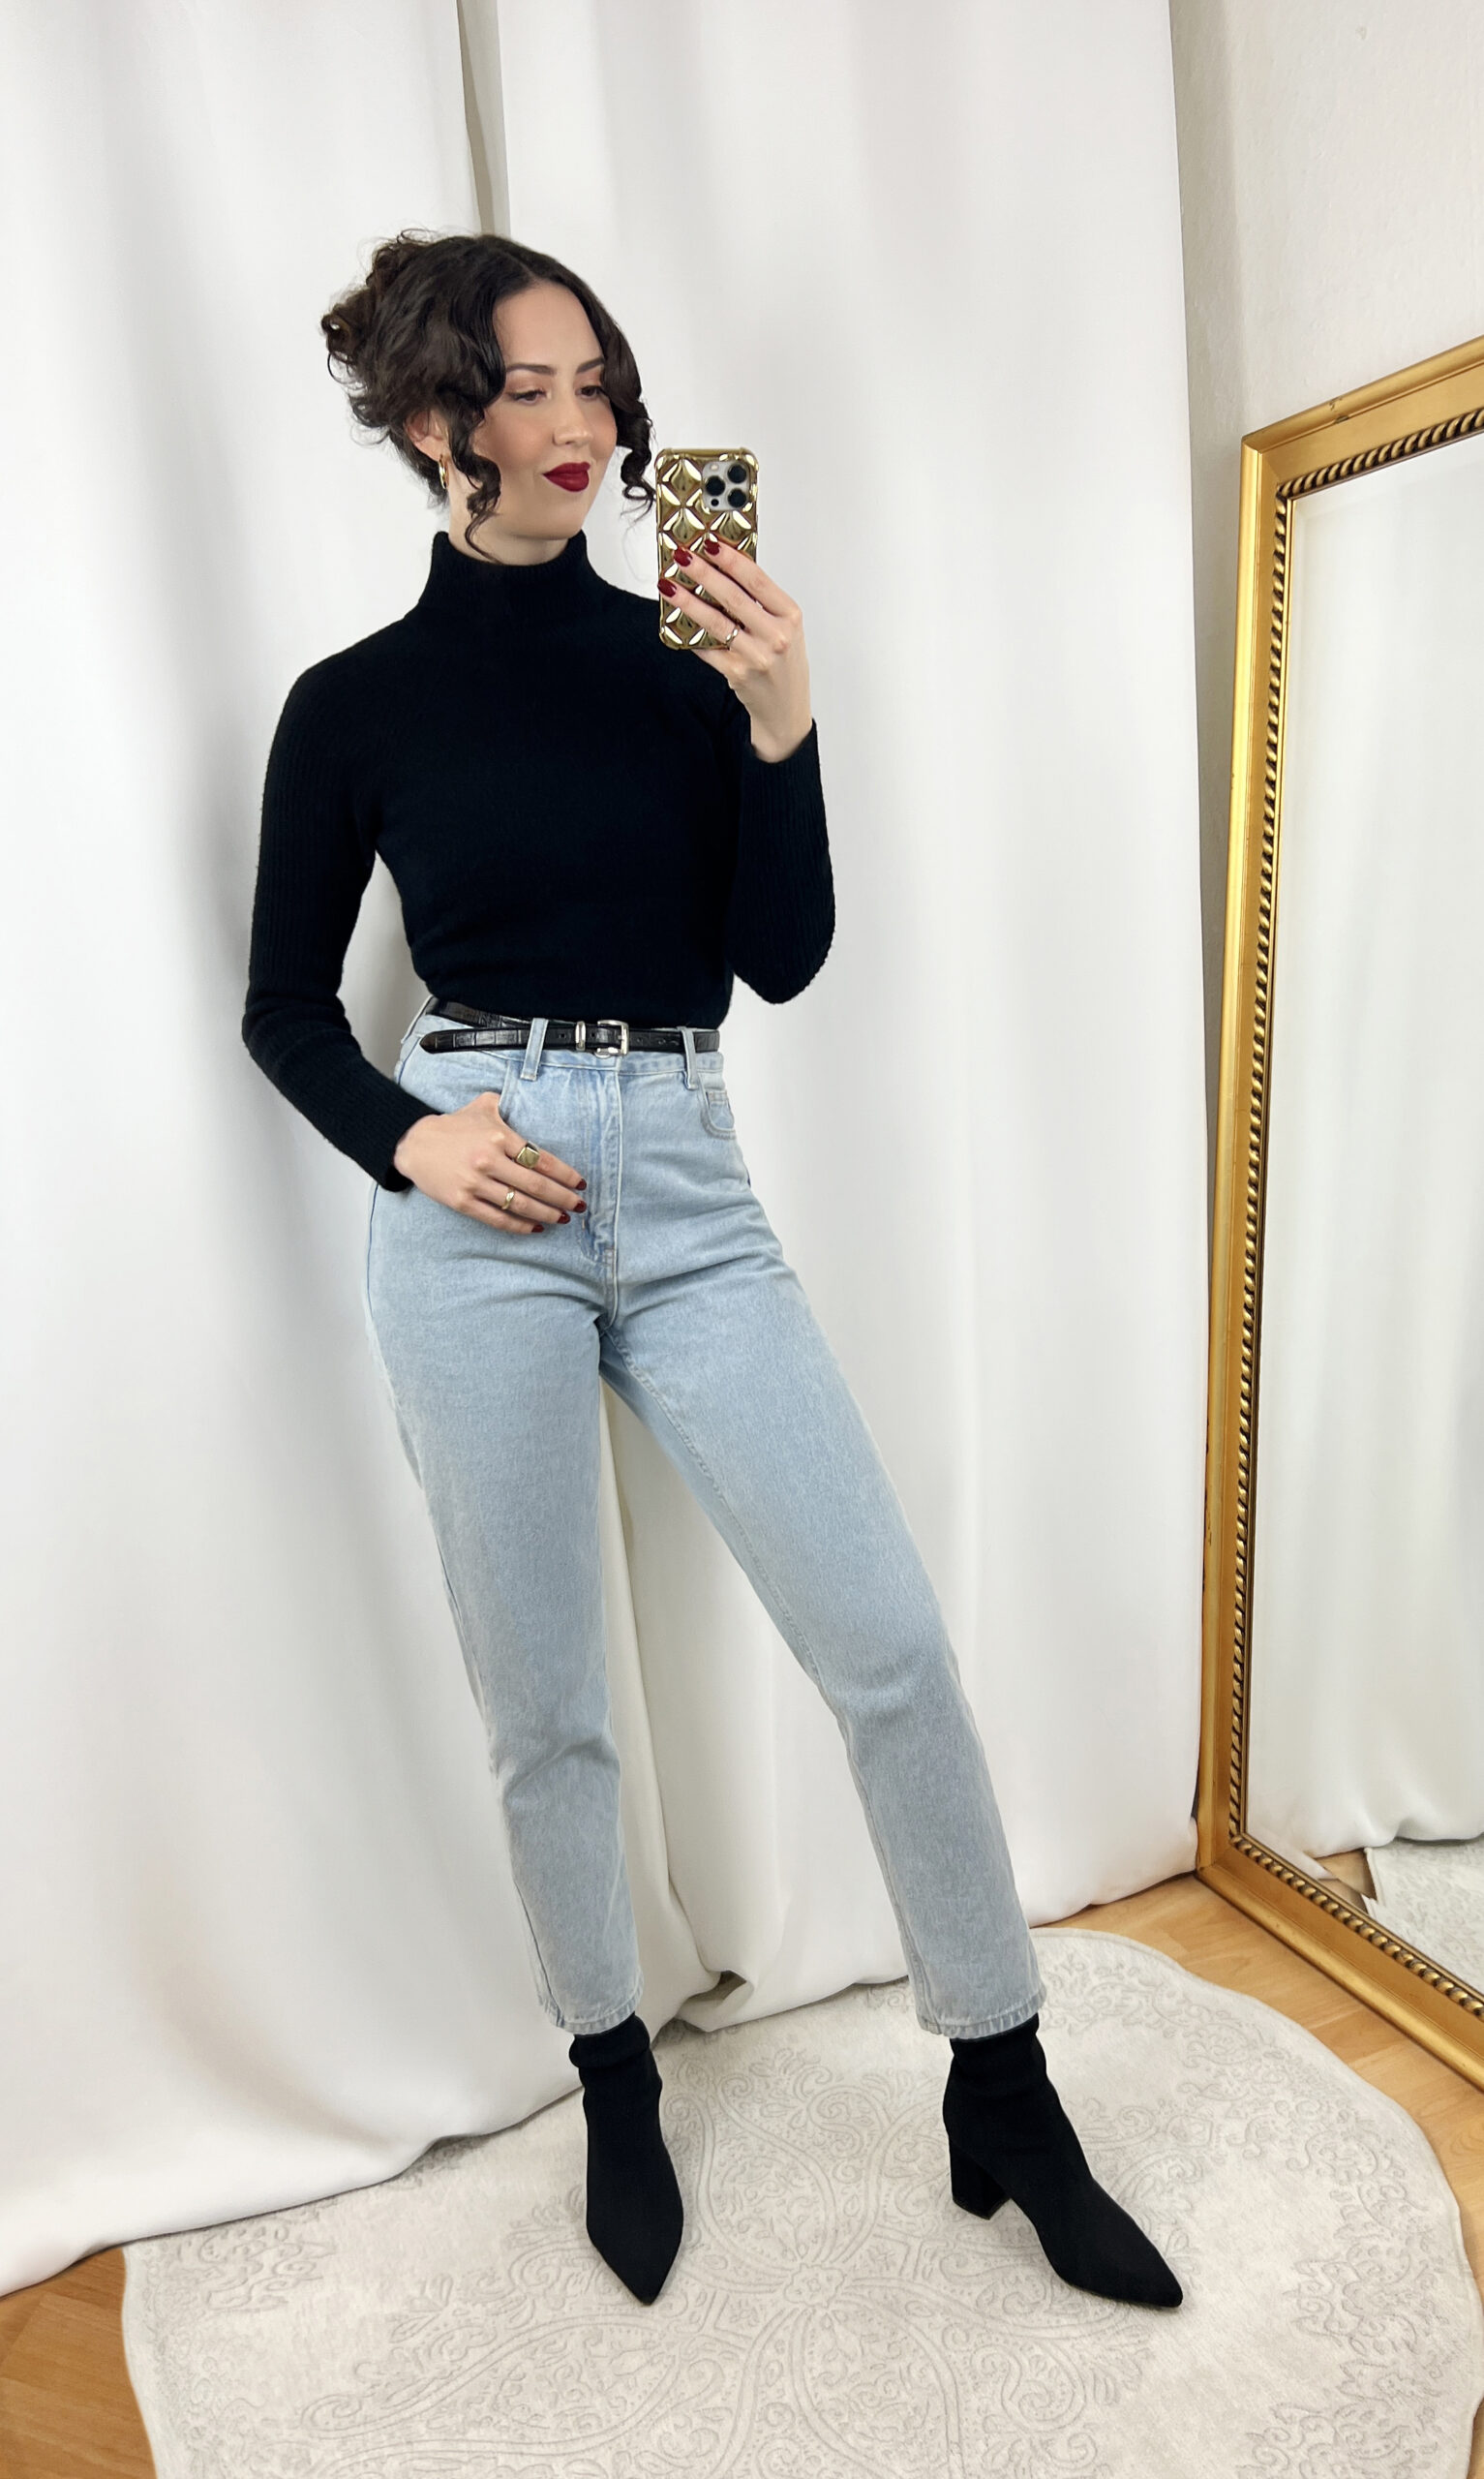 Black Turtleneck Outfit with Light Blue Mom Jeans